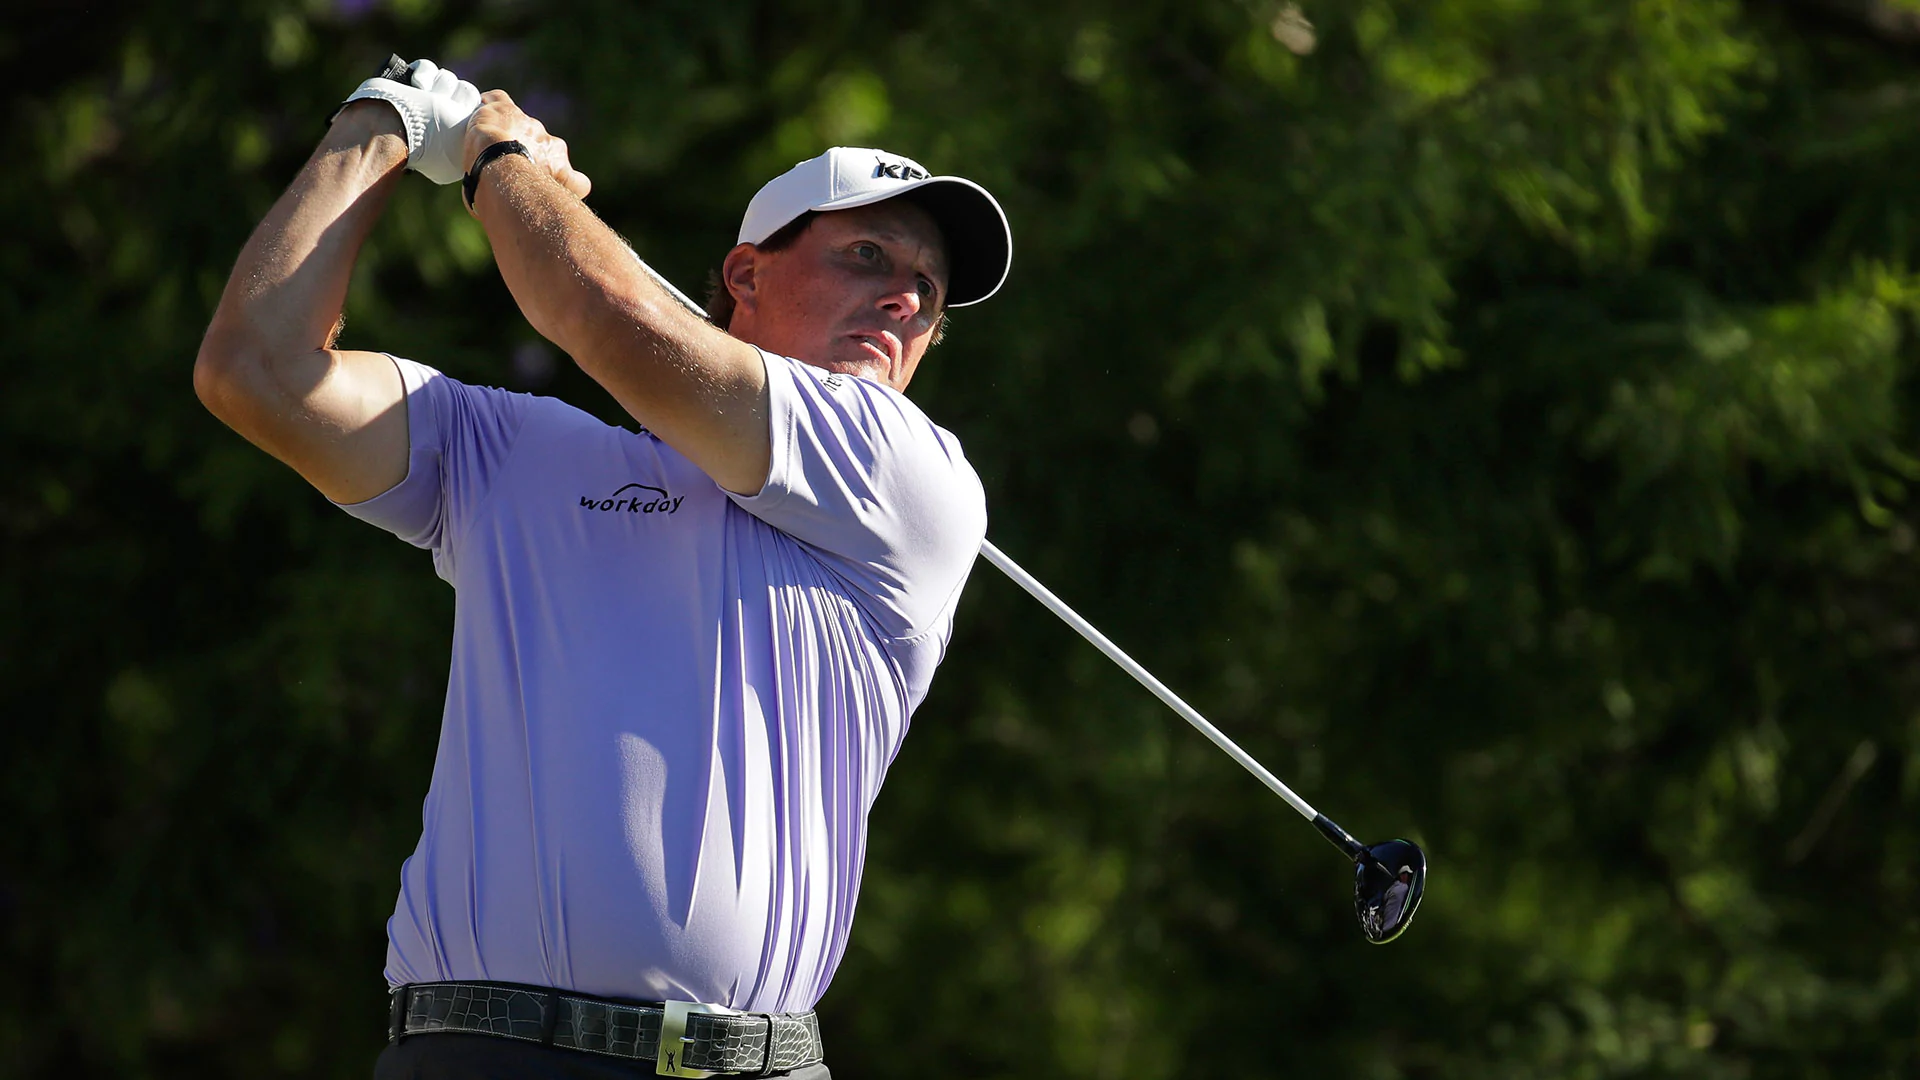 Mickelson grouped with Watson, Lee at Greenbrier